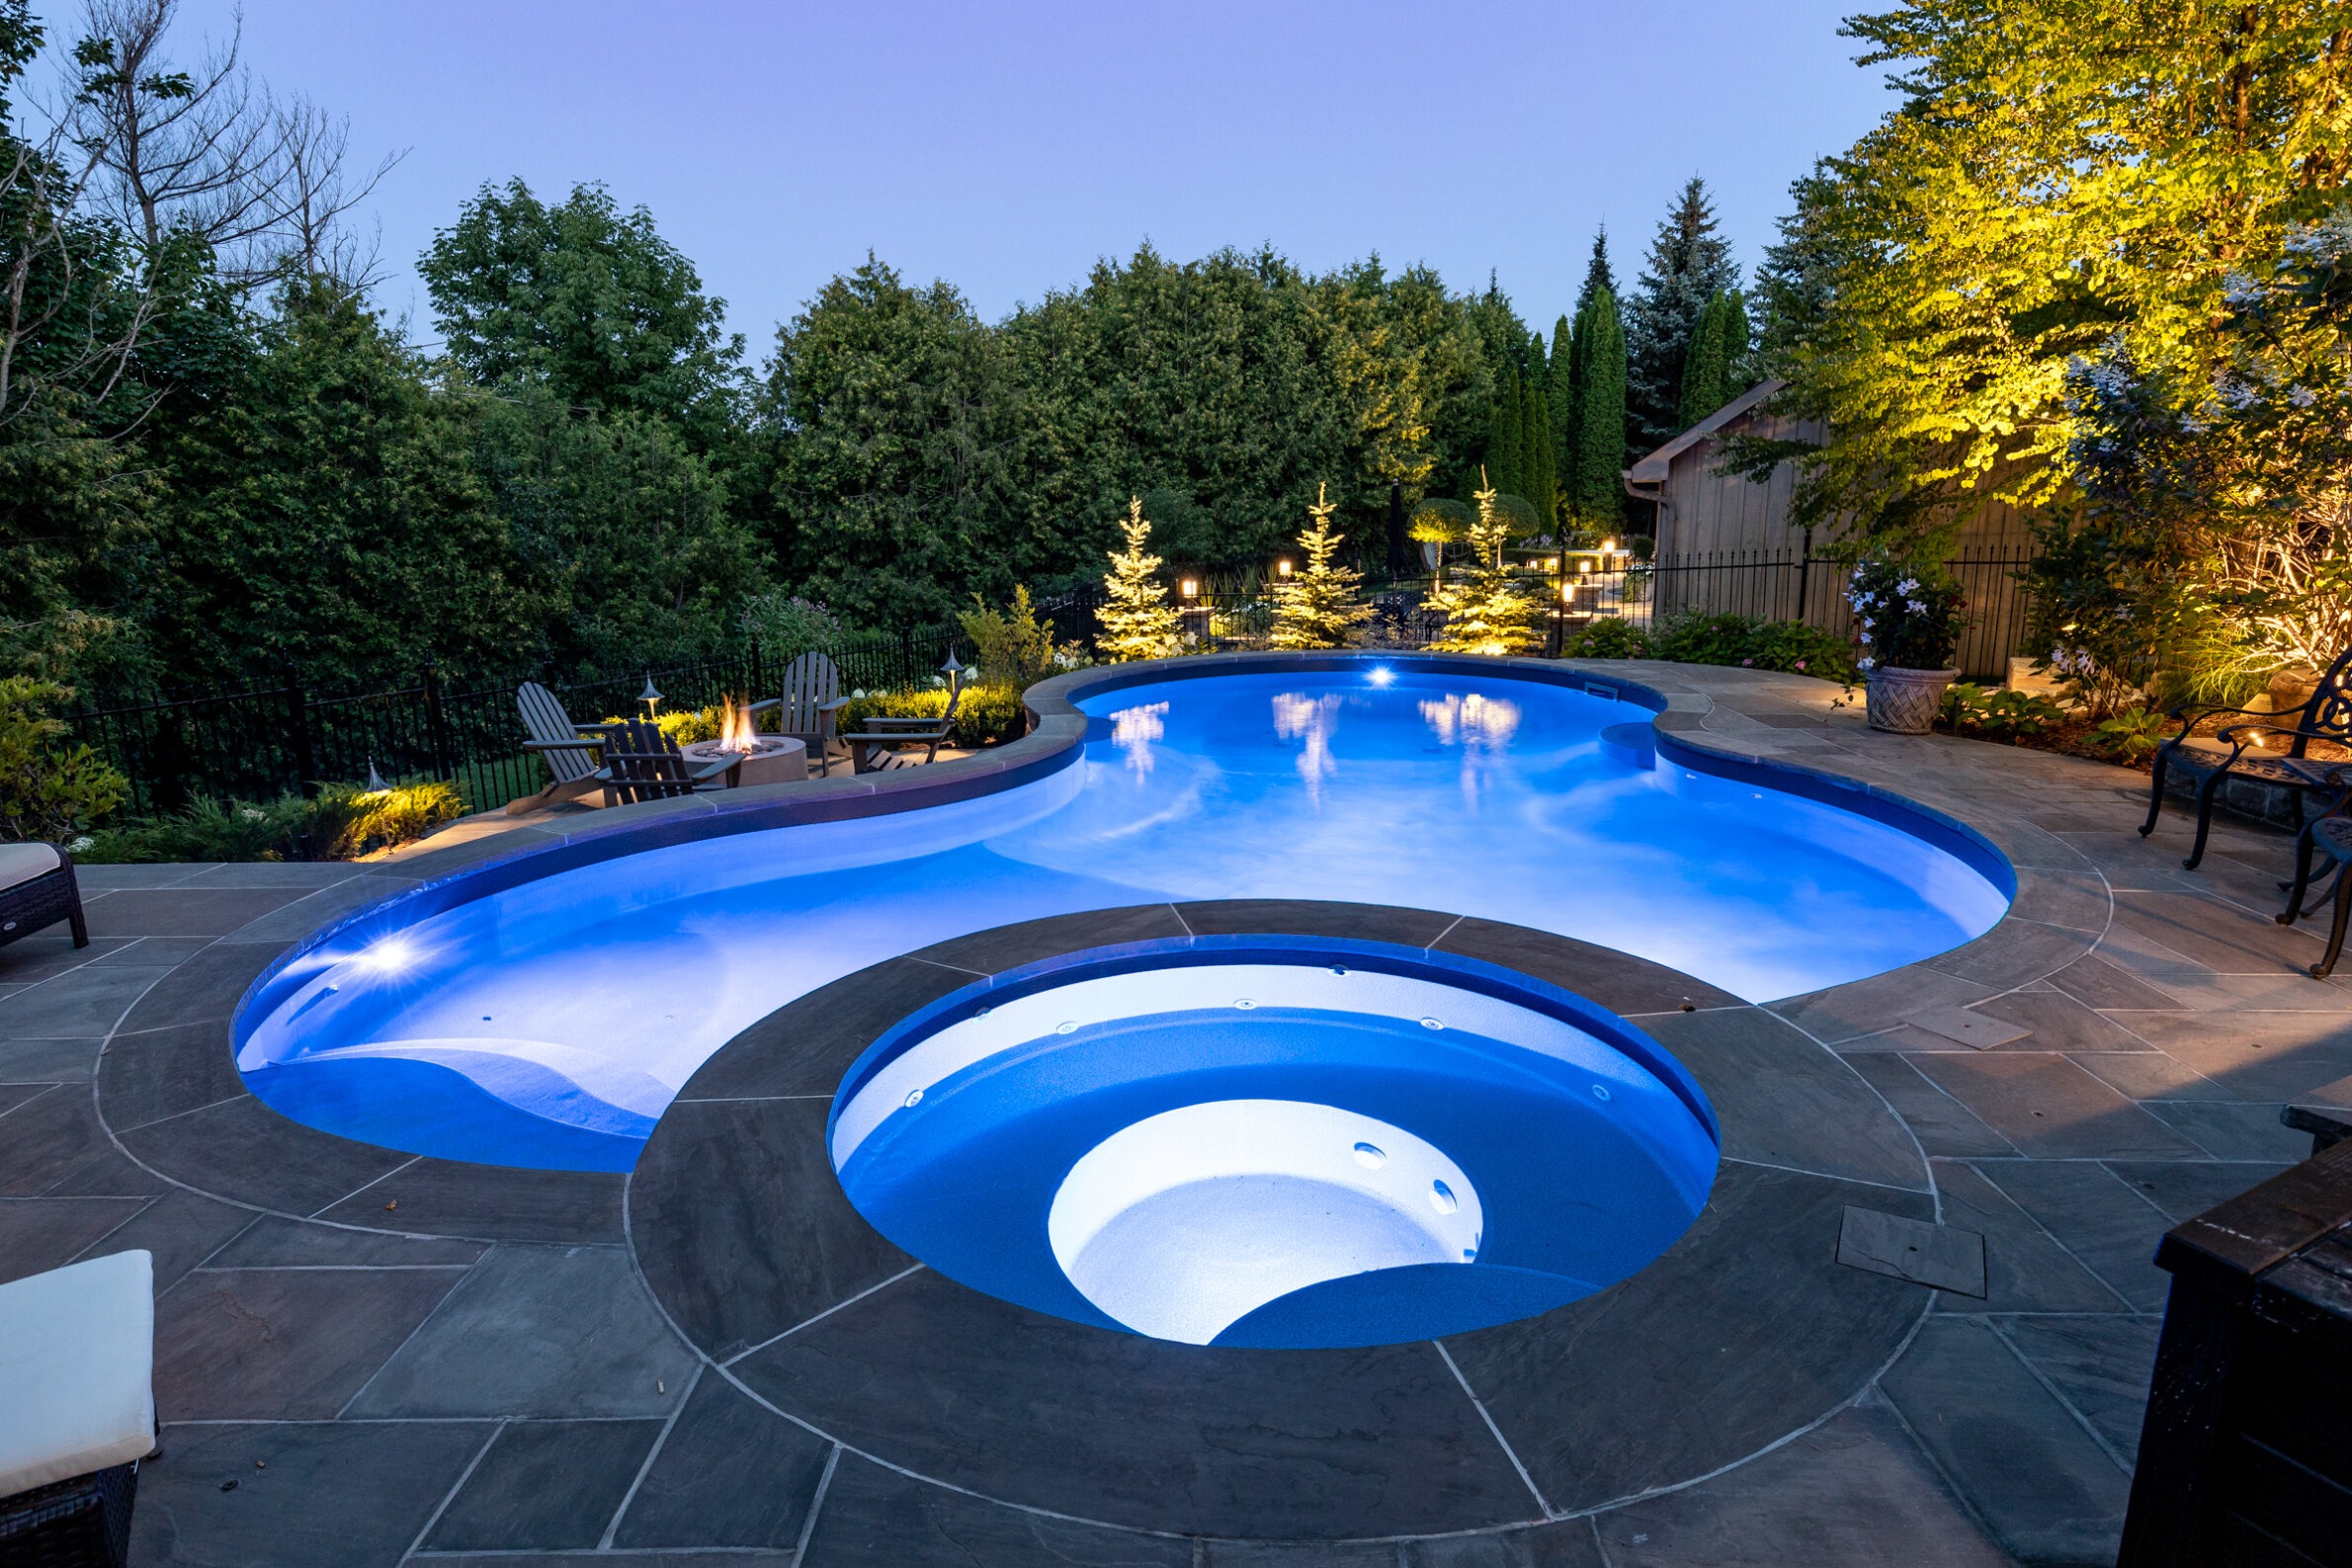 A luxurious backyard pool with blue lighting, adjacent hot tub, surrounded by lush trees and equipped with patio furniture and a lit fire pit.